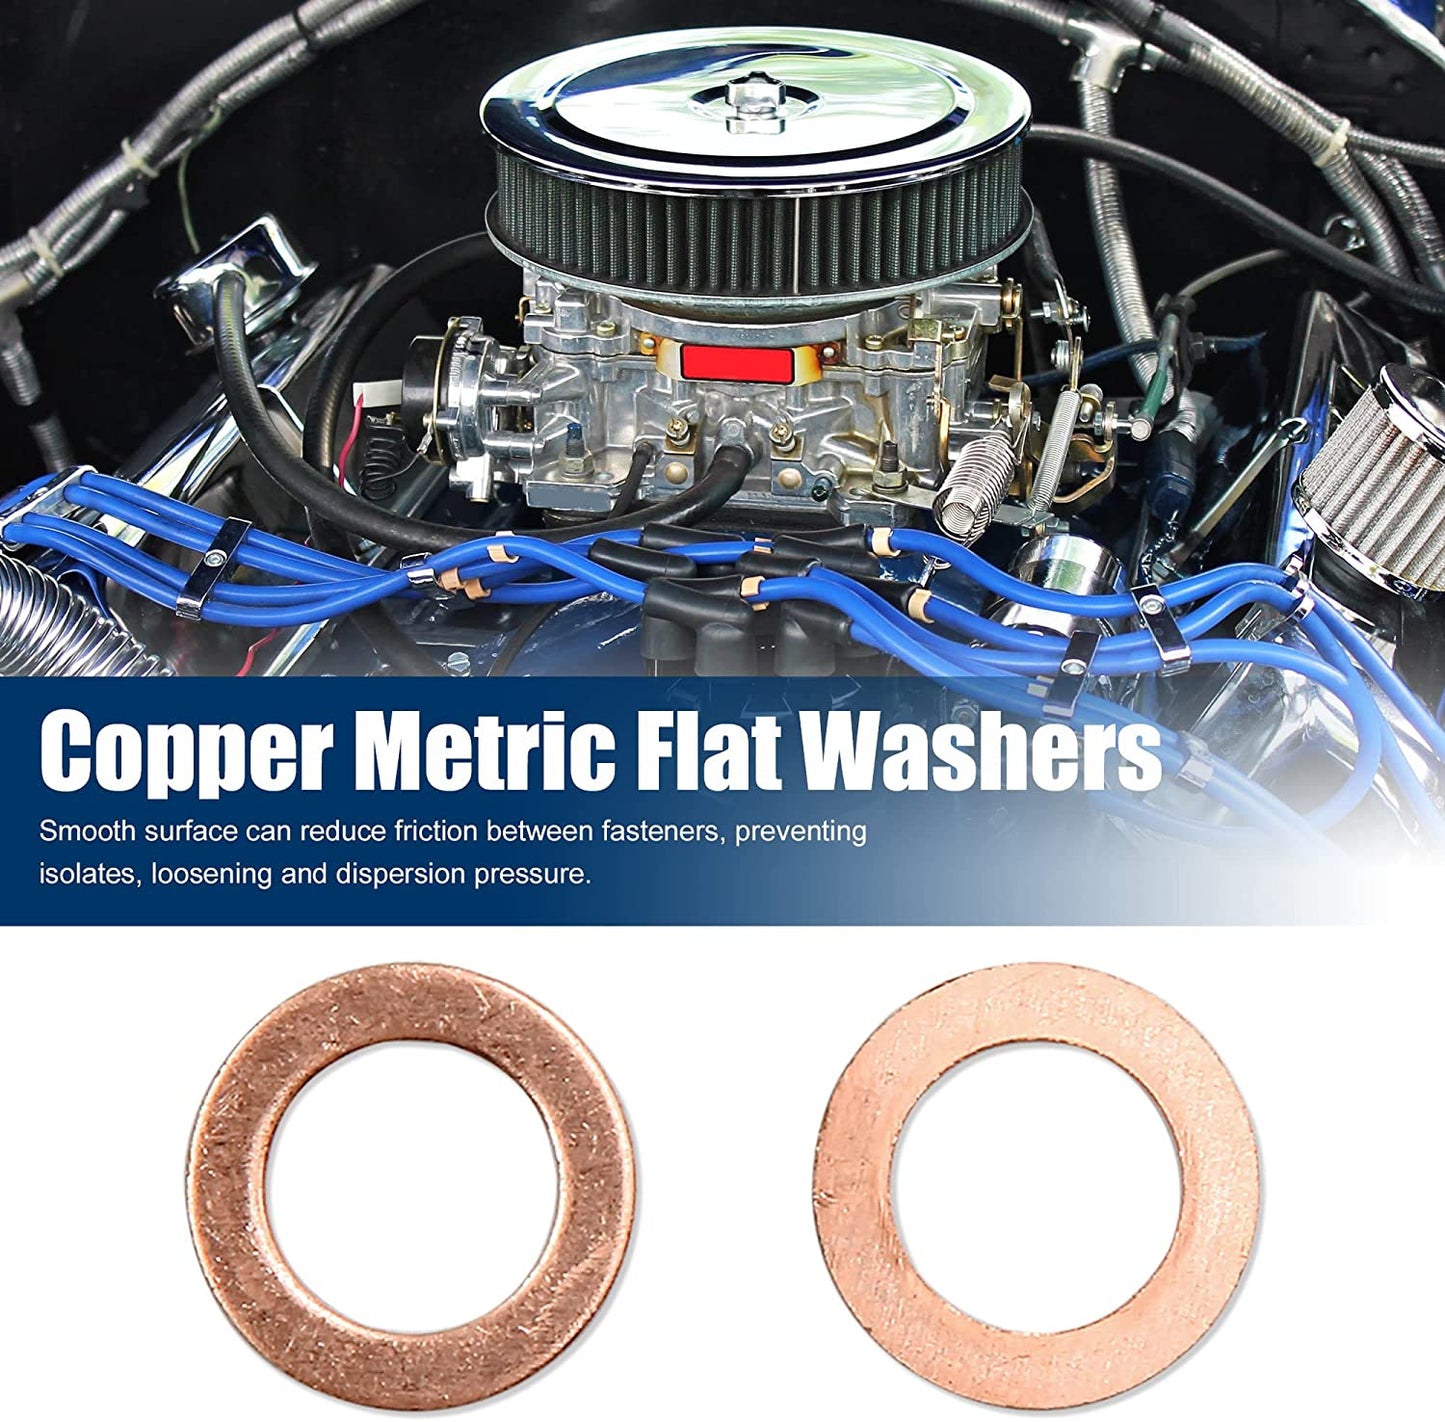 250pcs Metric M10x15x1mm Copper flat washer gasket Copper crush washer Sealing Ring for Screw Bolt Nut